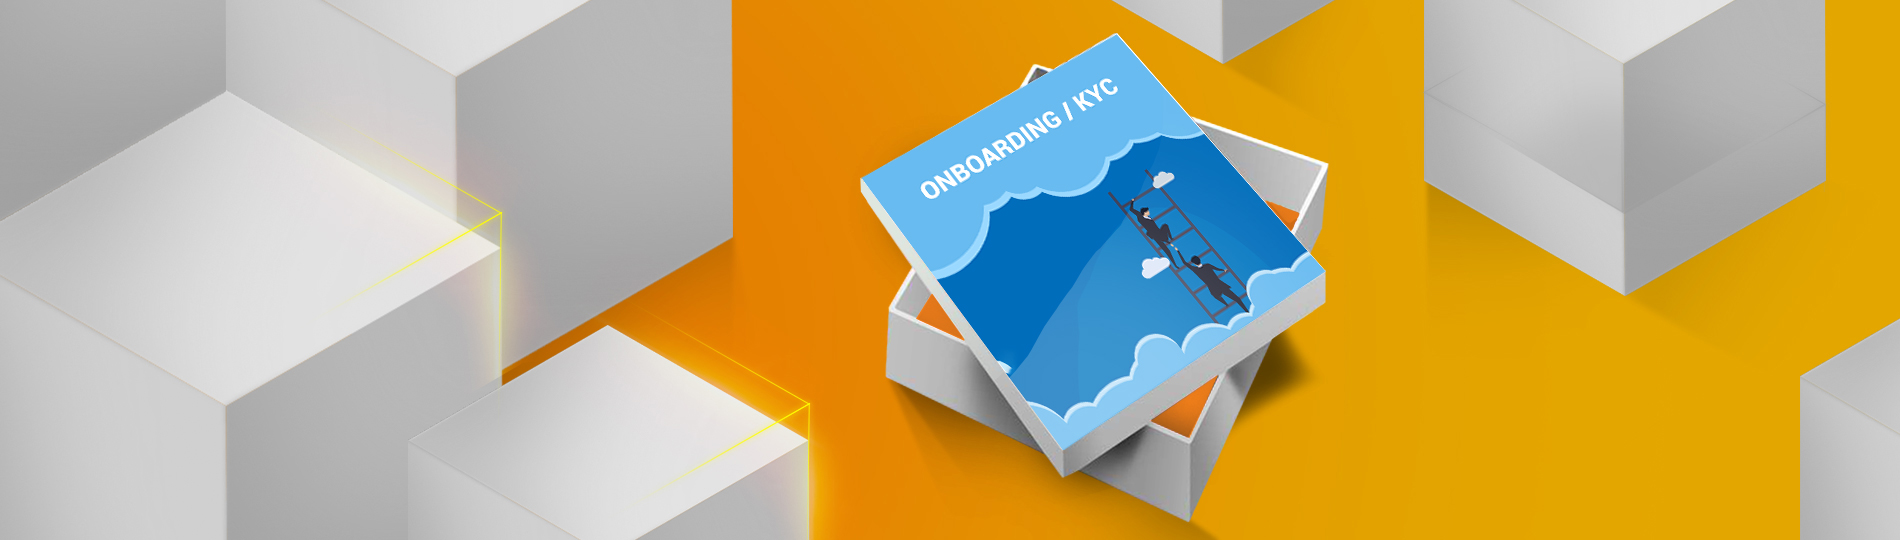 Portail onboarding client KYC